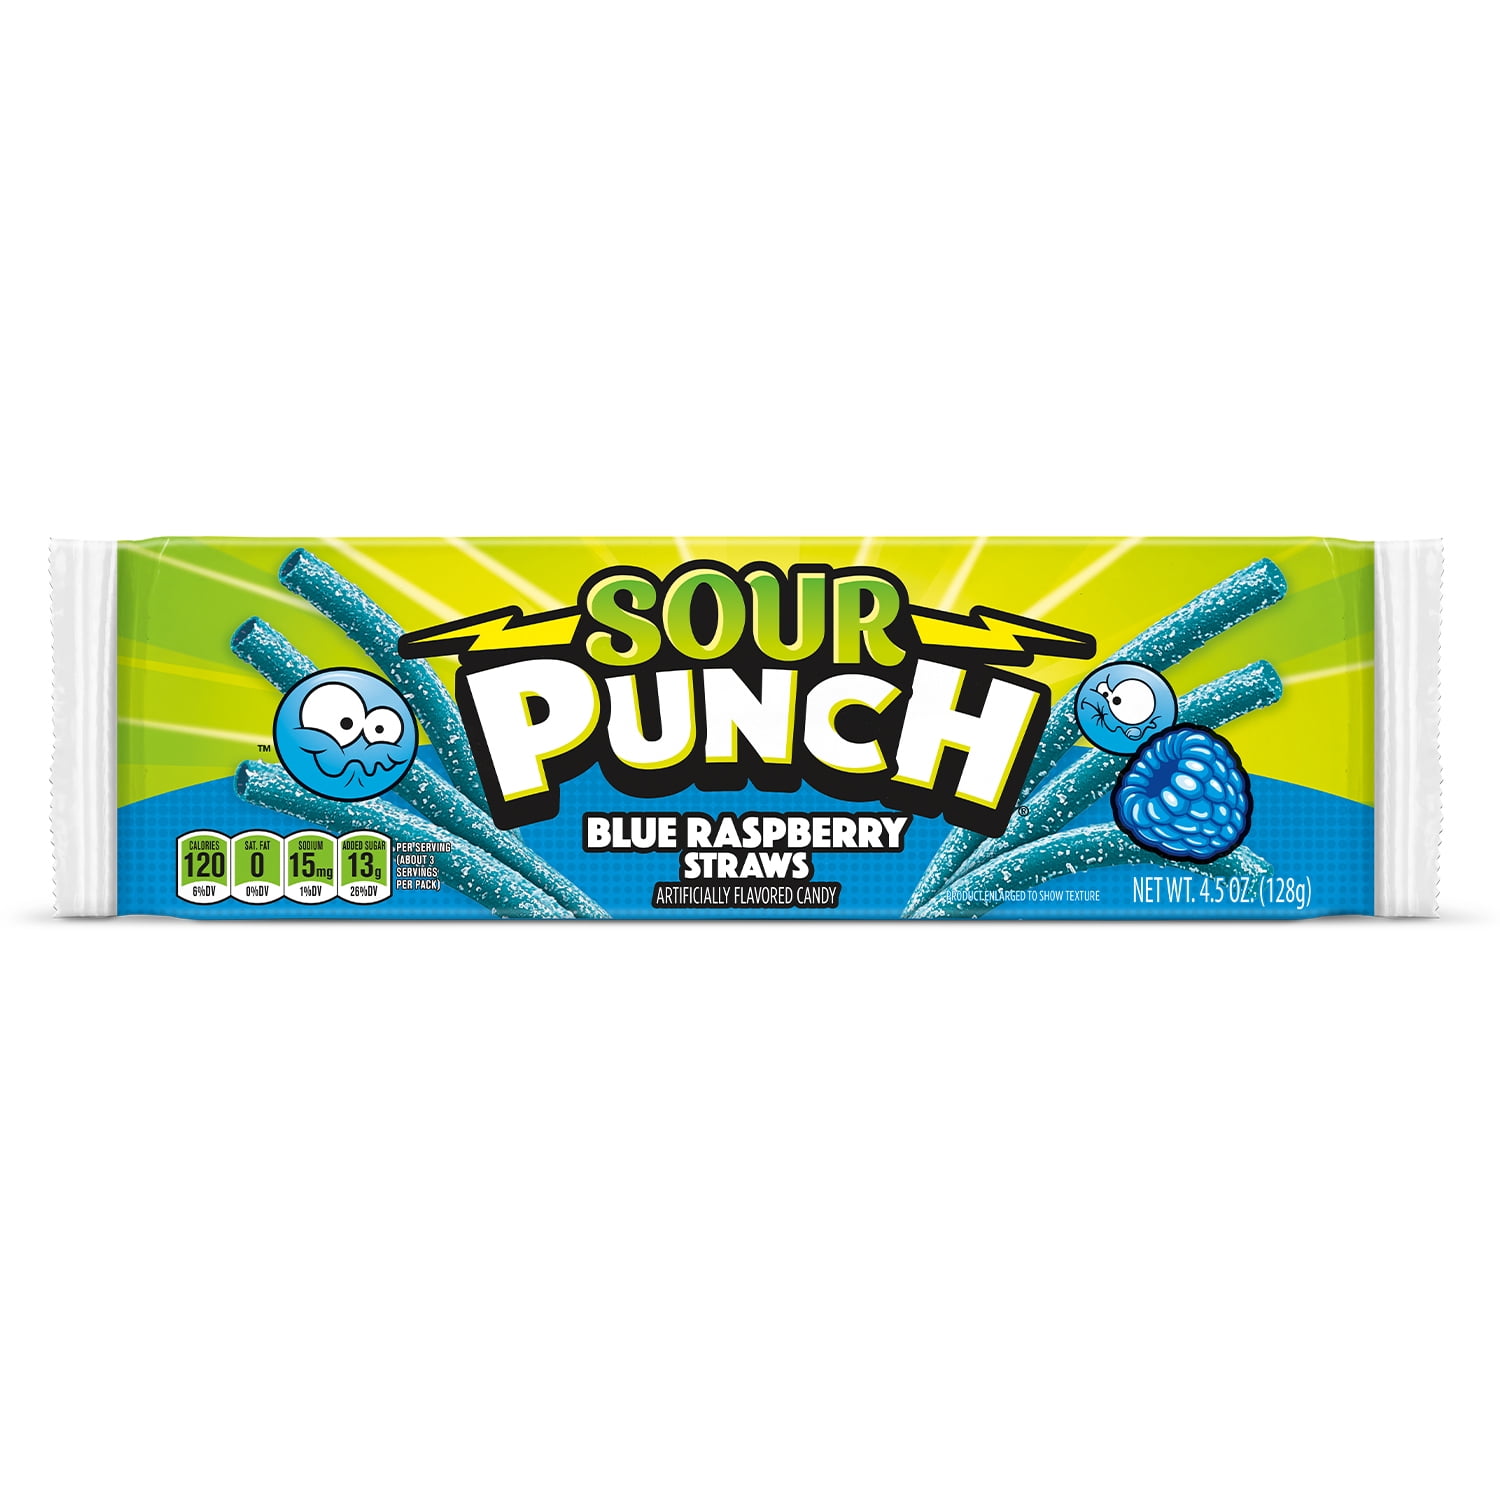 Picture of Sour Punch 9073639 4.5 oz Punch Blue Raspberry Straws Candy - Pack of 24